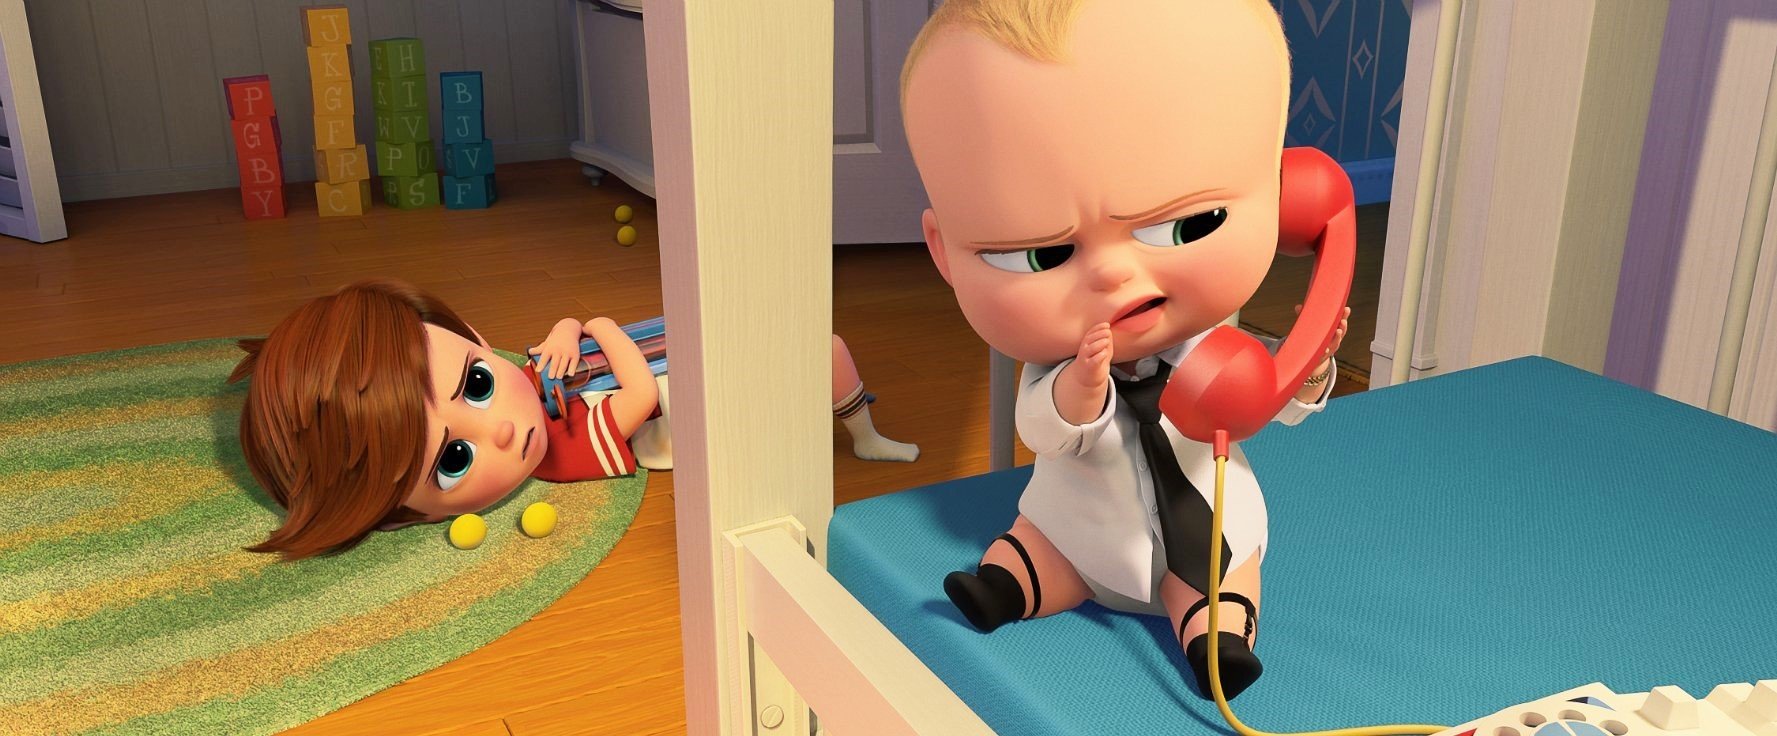 Tim and Baby from 20th Century Fox's The Boss Baby (2017)